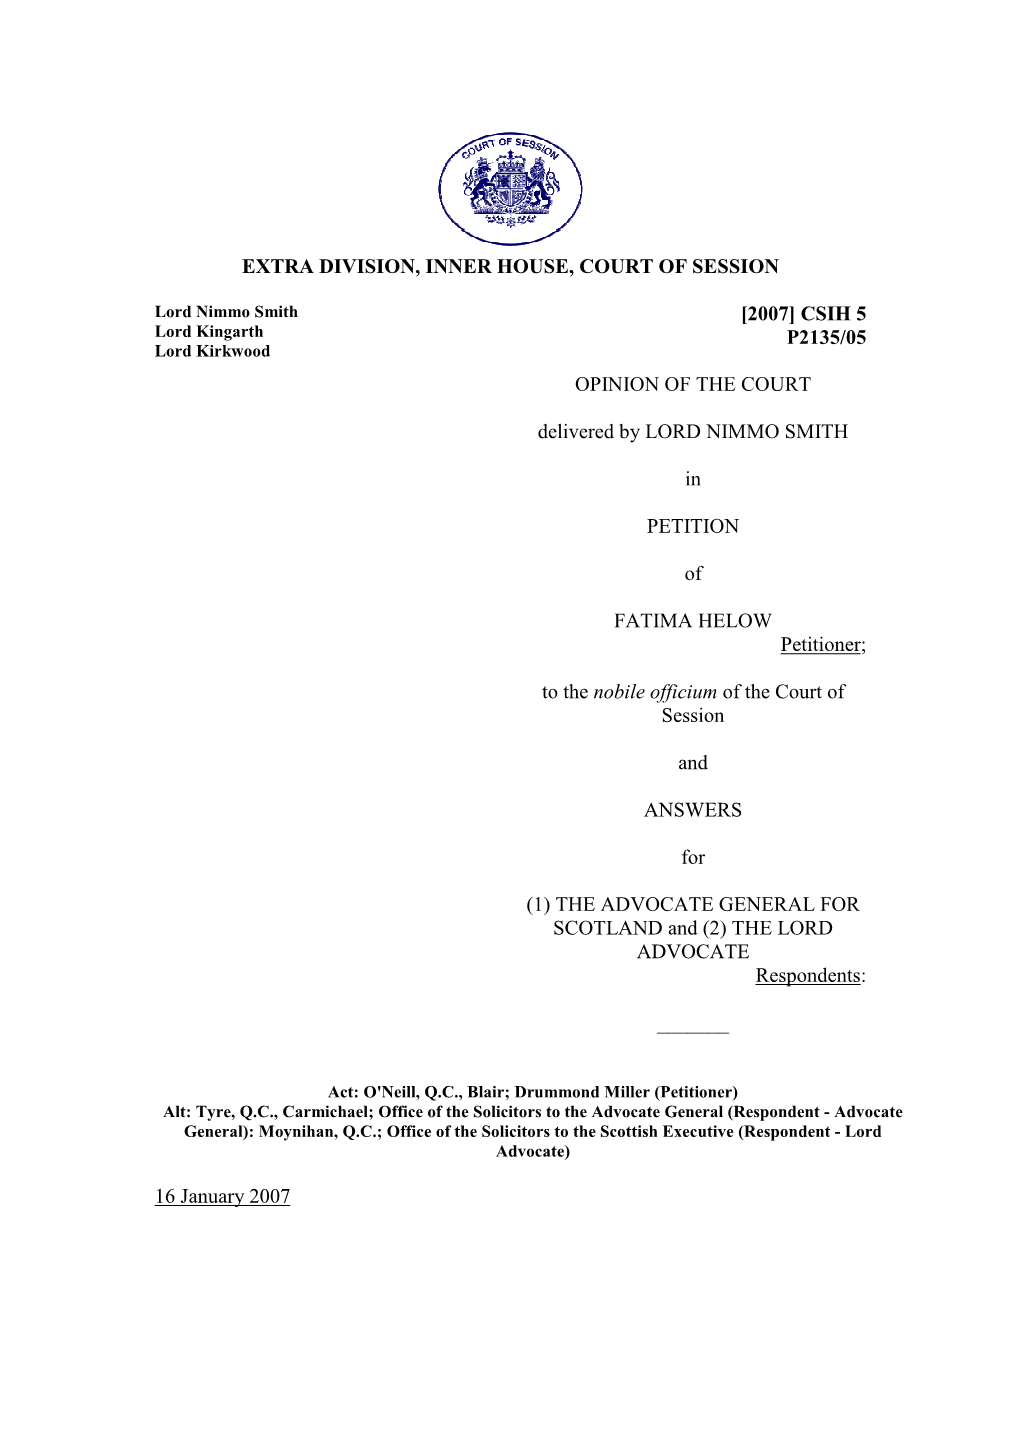 CSIH 5 P2135/05 OPINION of the COURT Delivered By